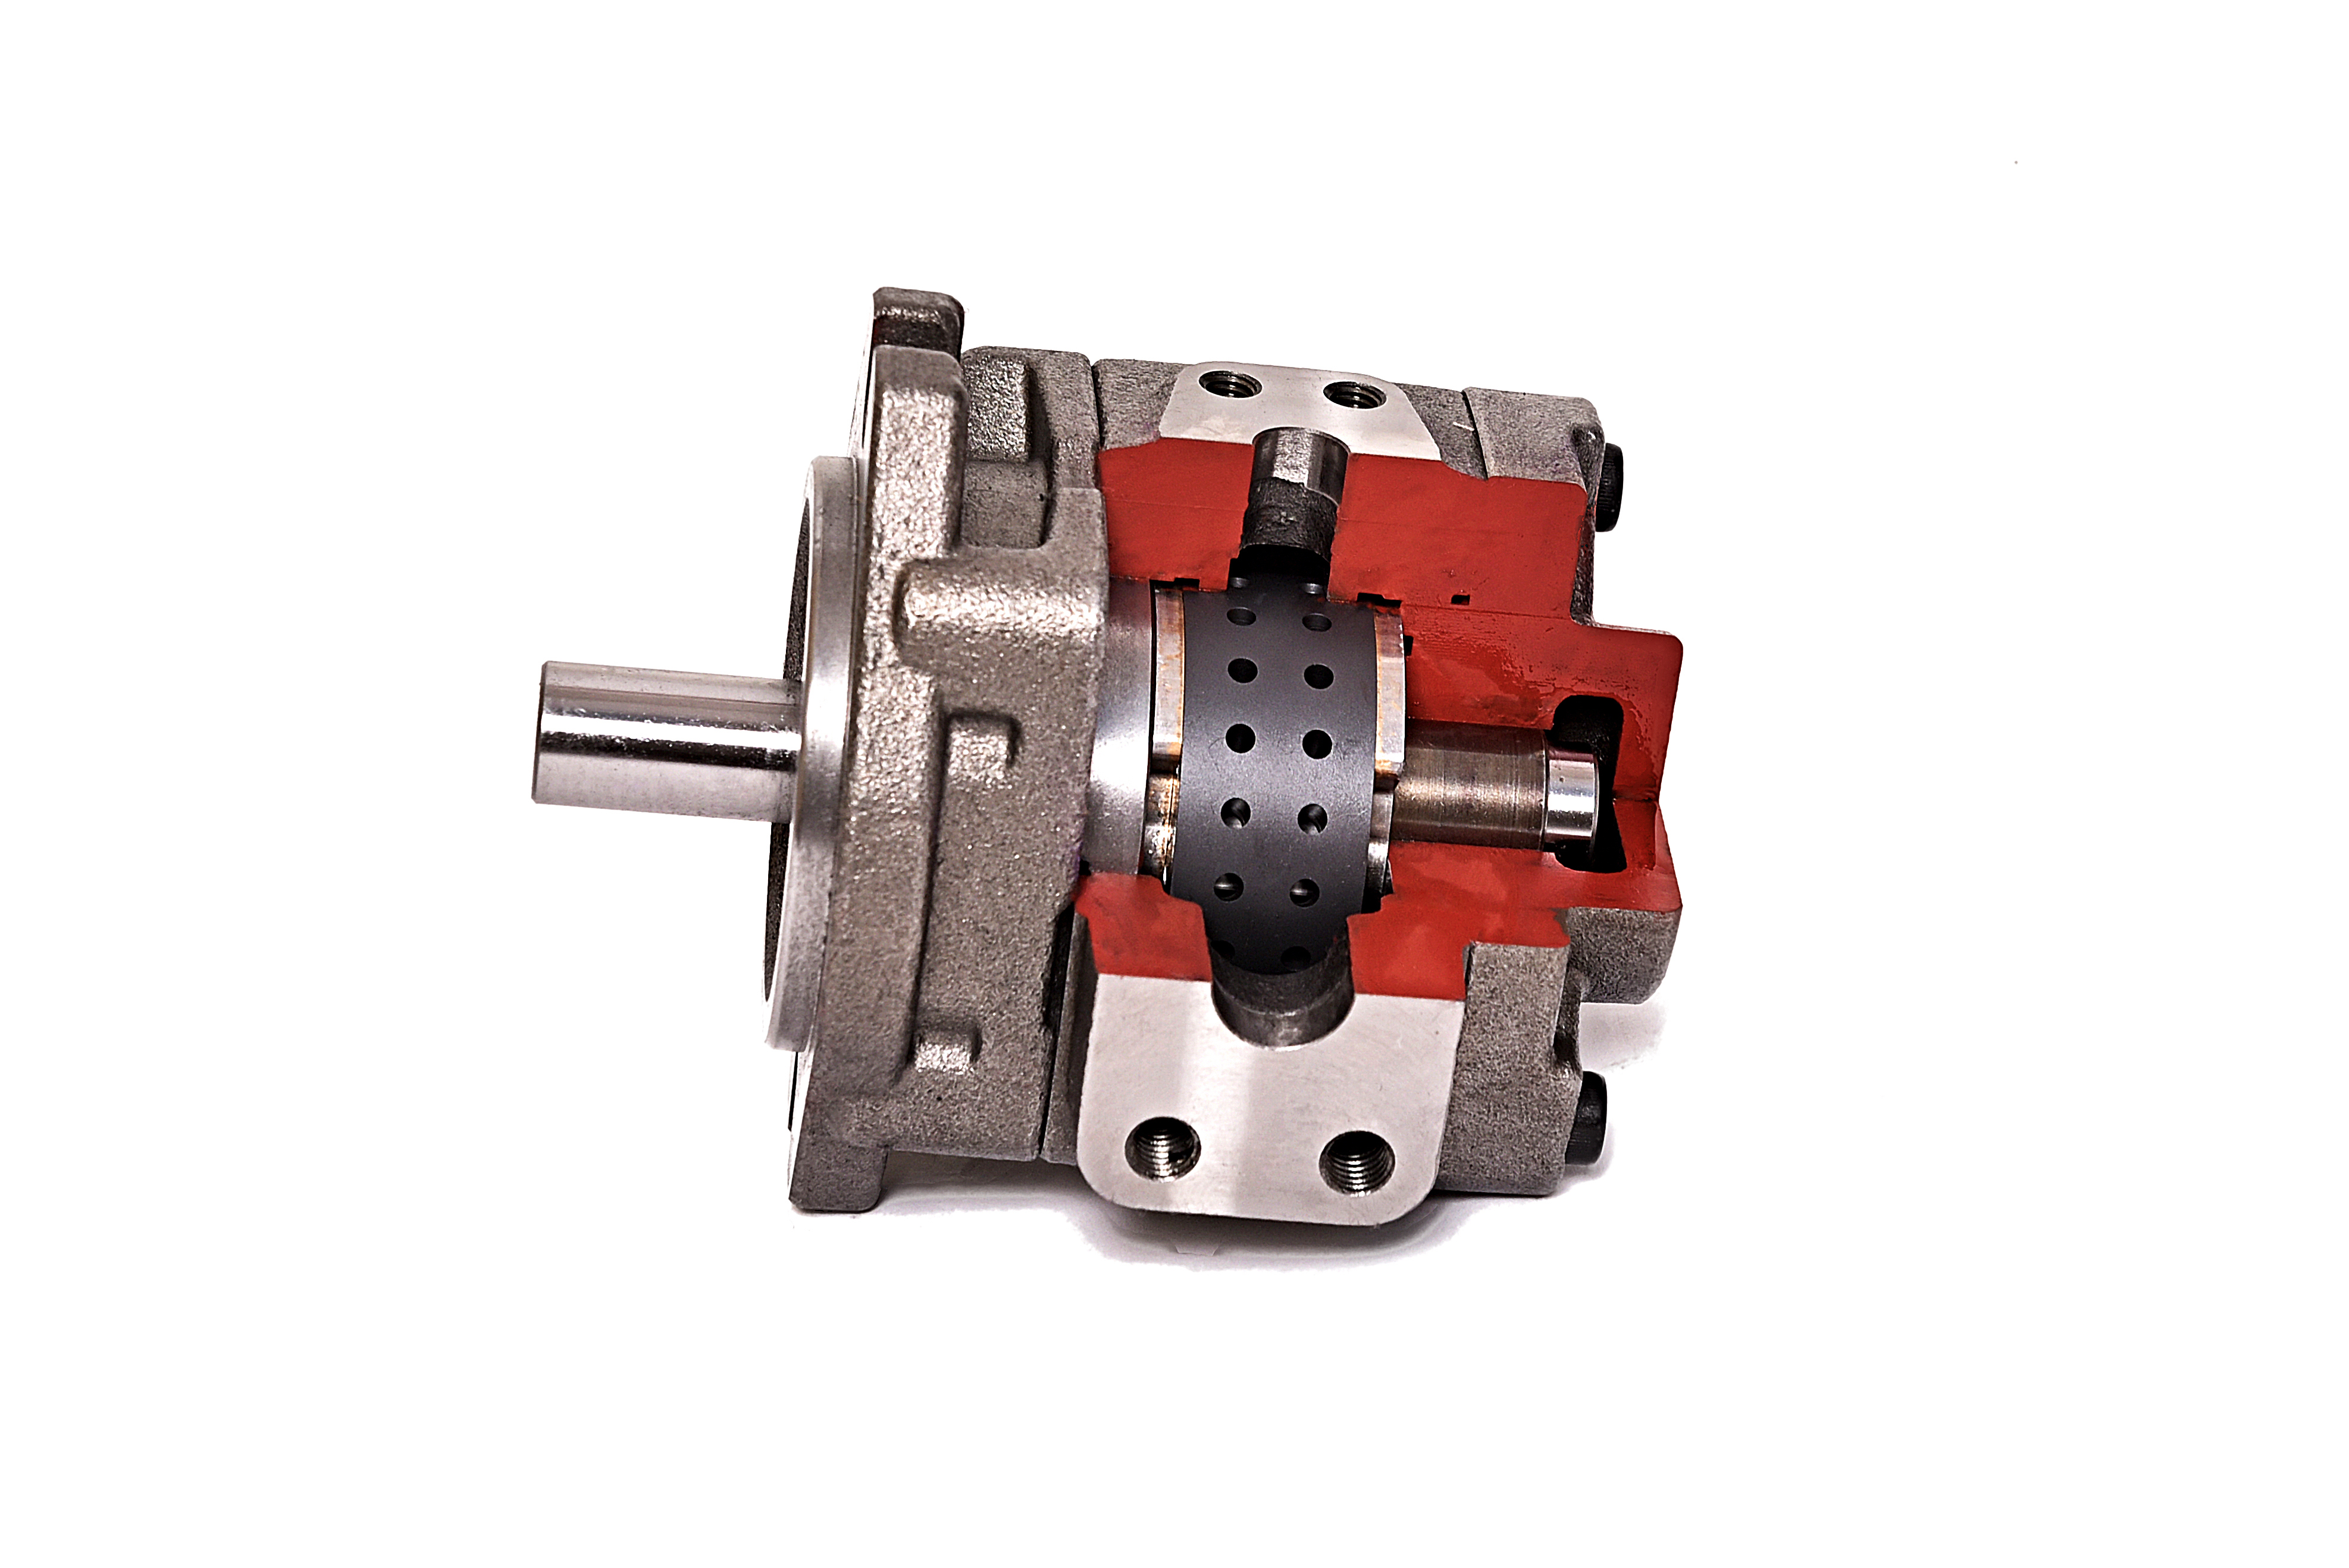 Why the HYDRAULIC GEAR PUMP is loved